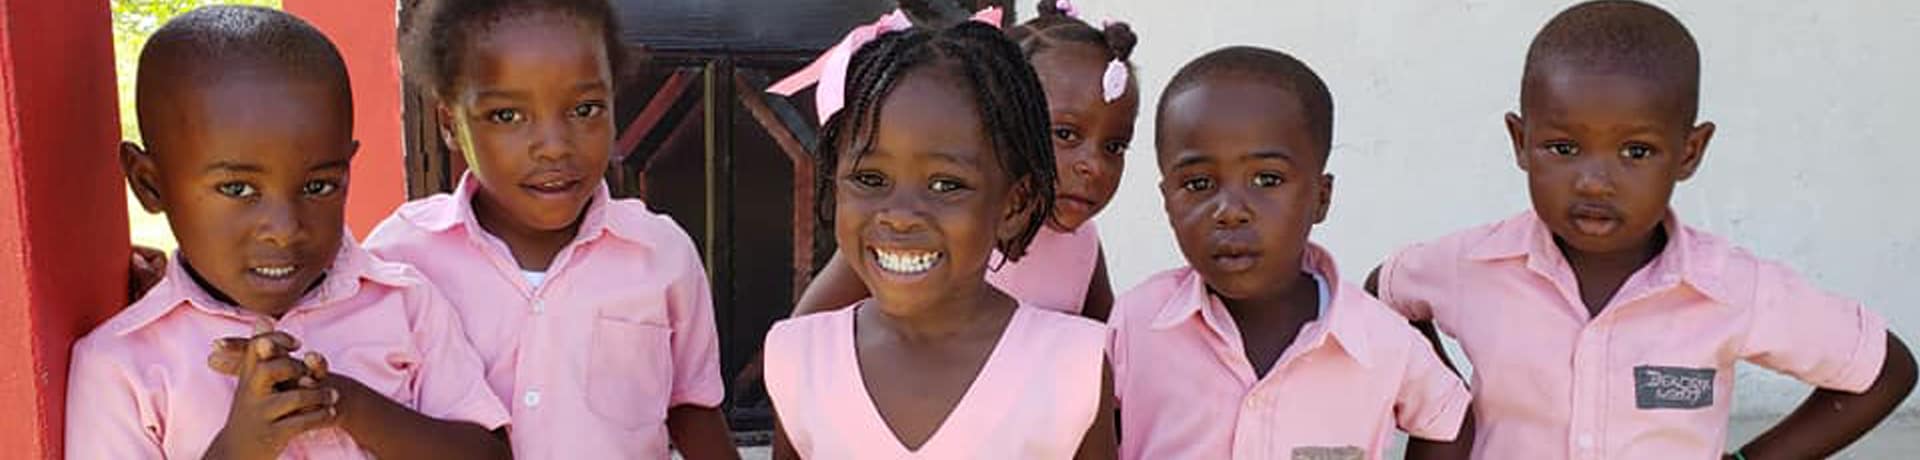 Making a difference: photo of school children in Haiti at the Schools for Haiti